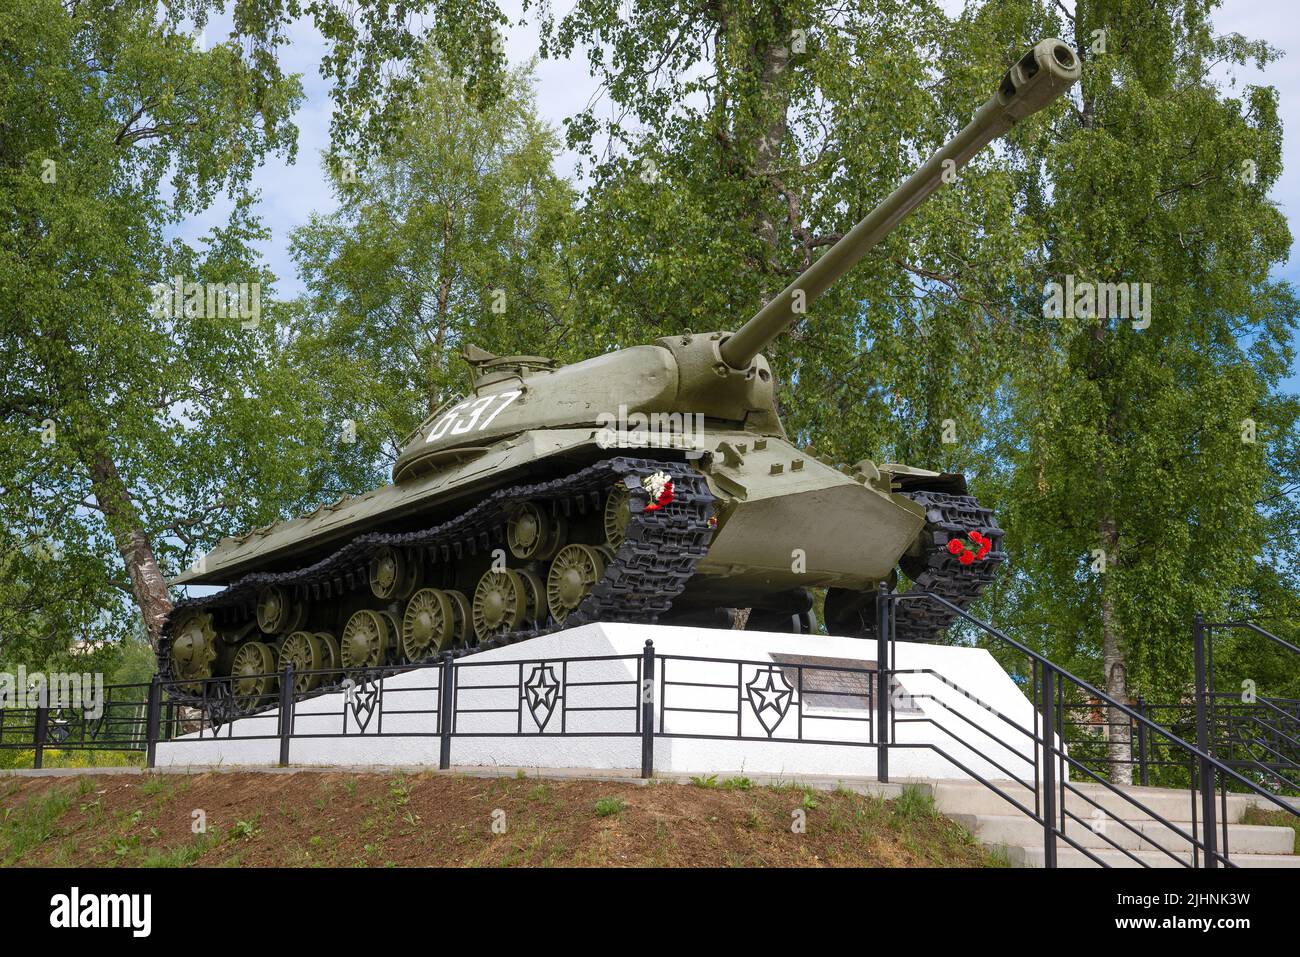 PRIOZERSK, RUSSIA - JUNE 17, 2018: Tank IS-3 model 1945 on a July afternoon. Monument in honor of the 55th anniversary of the Victory in the Great Pat Stock Photo